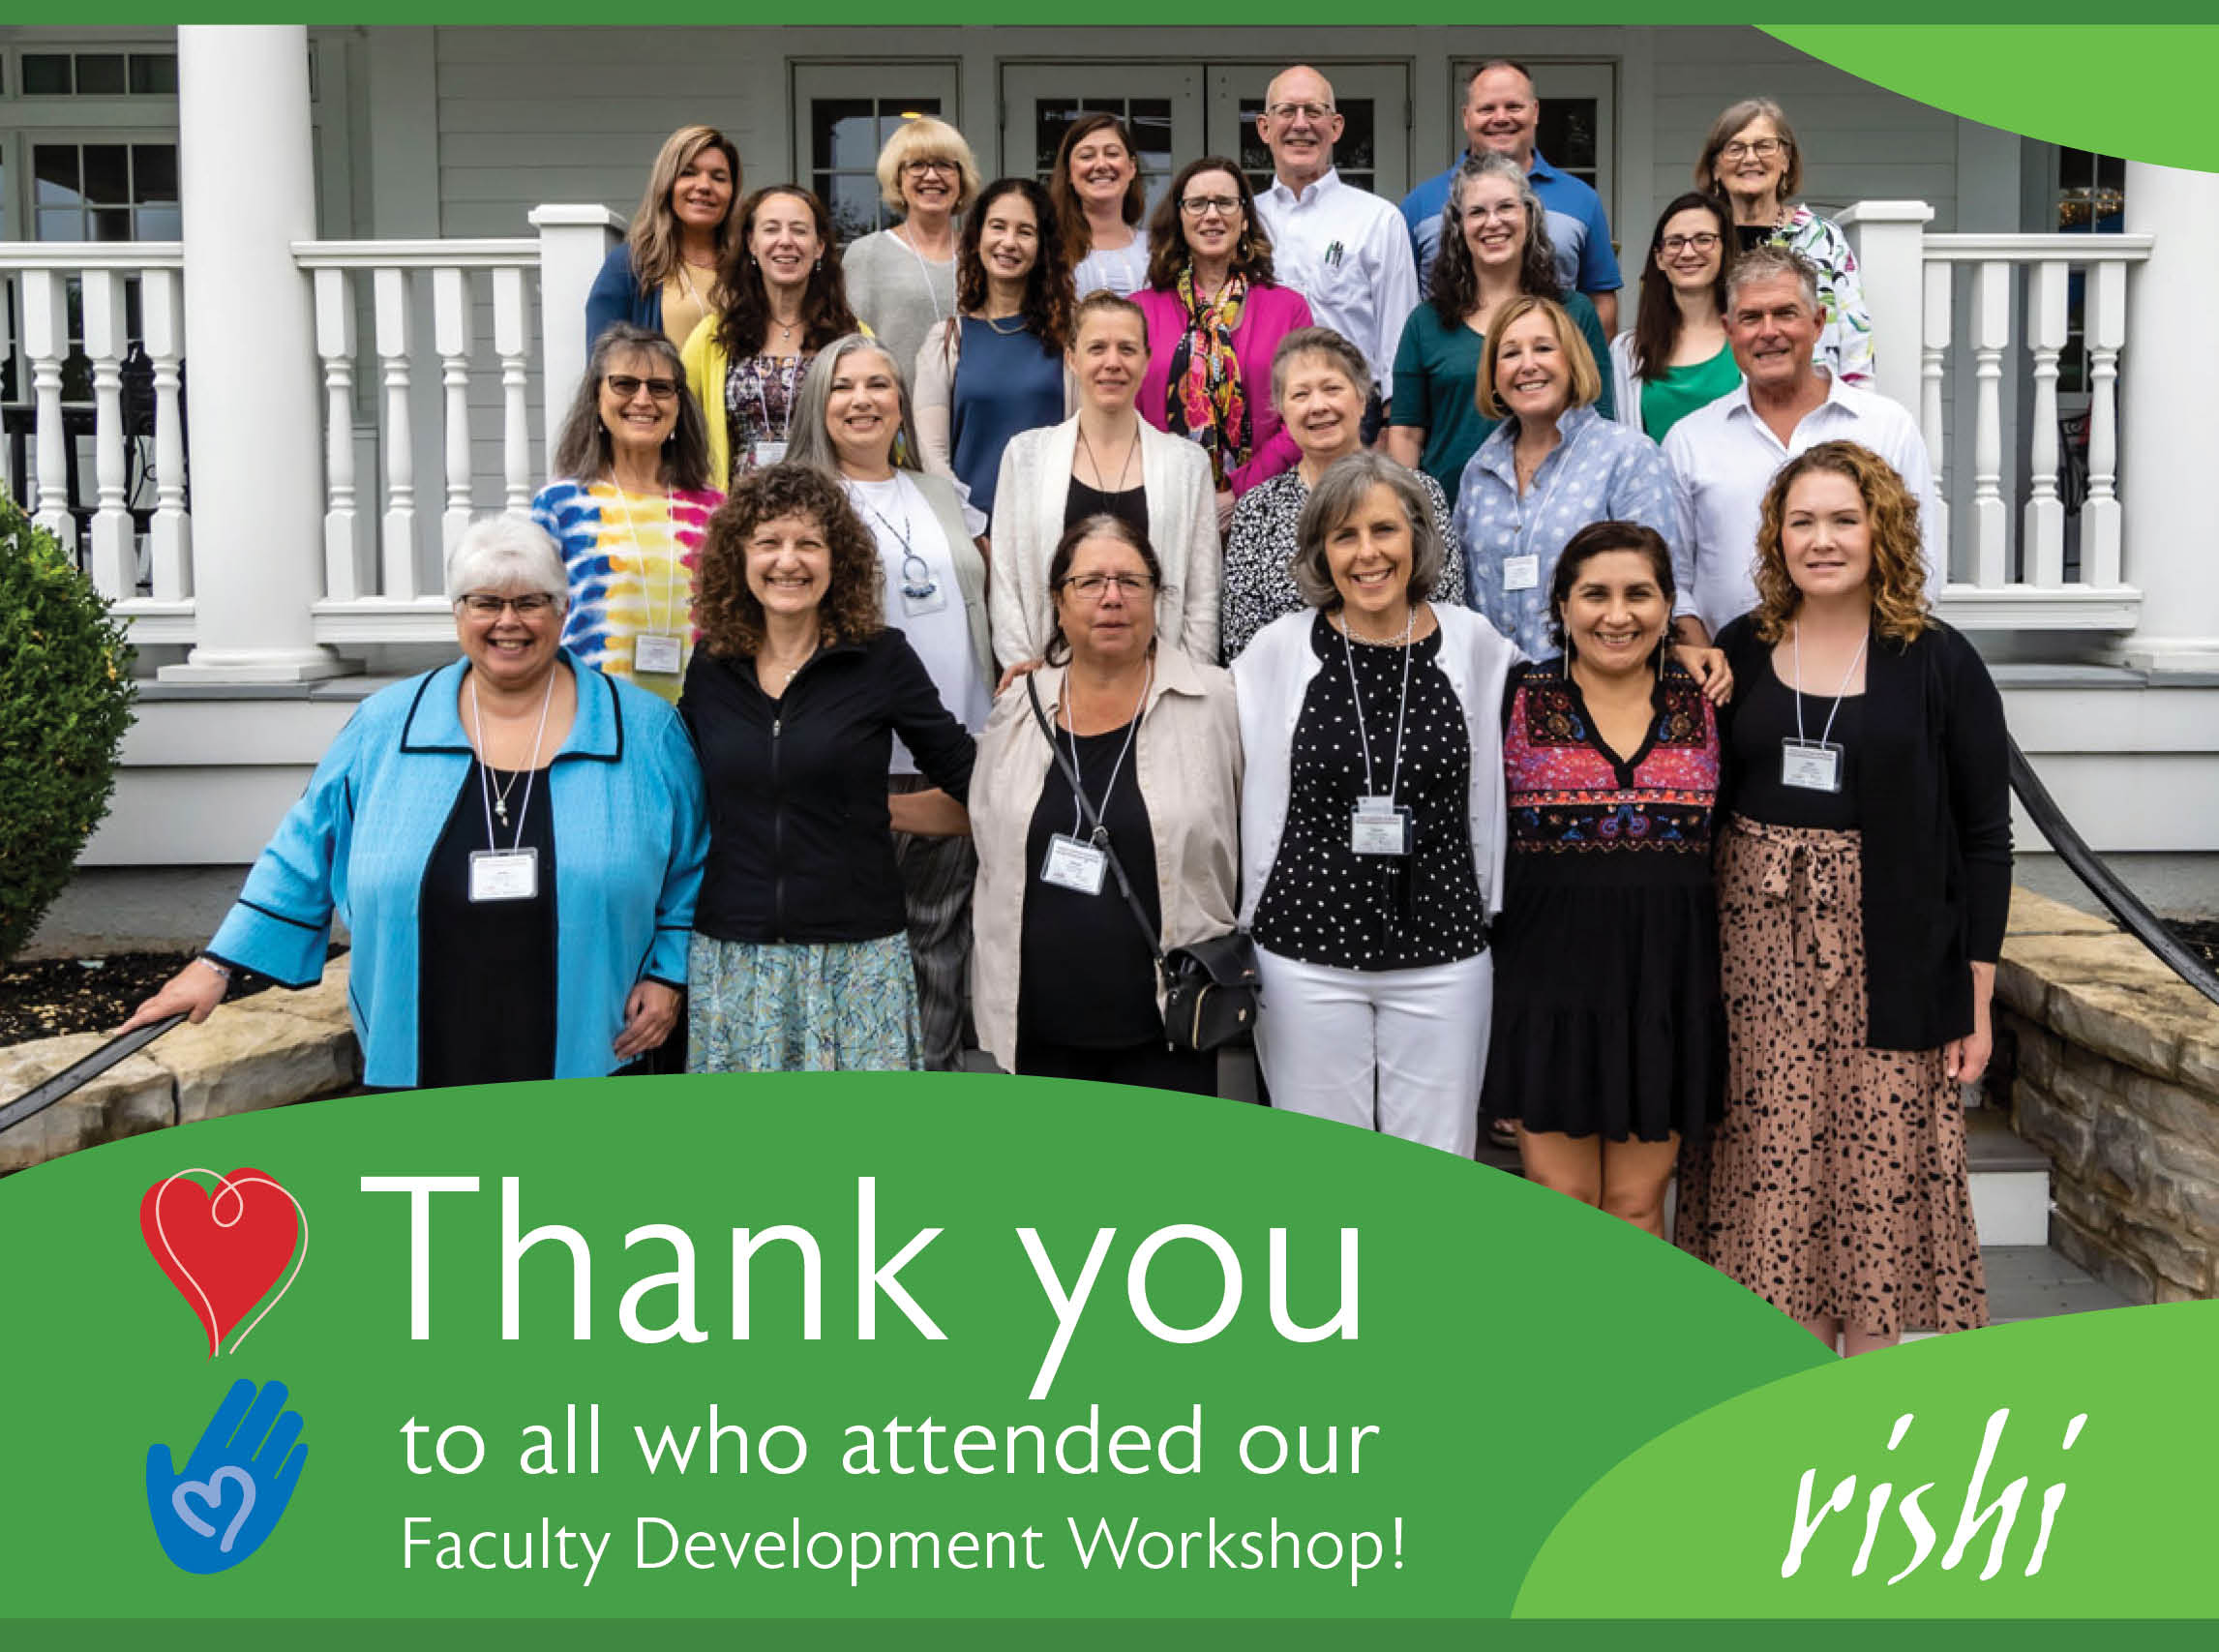 Thank you to all who attended our Faculty Development Workshop! - RISHI at Pure Healthcare